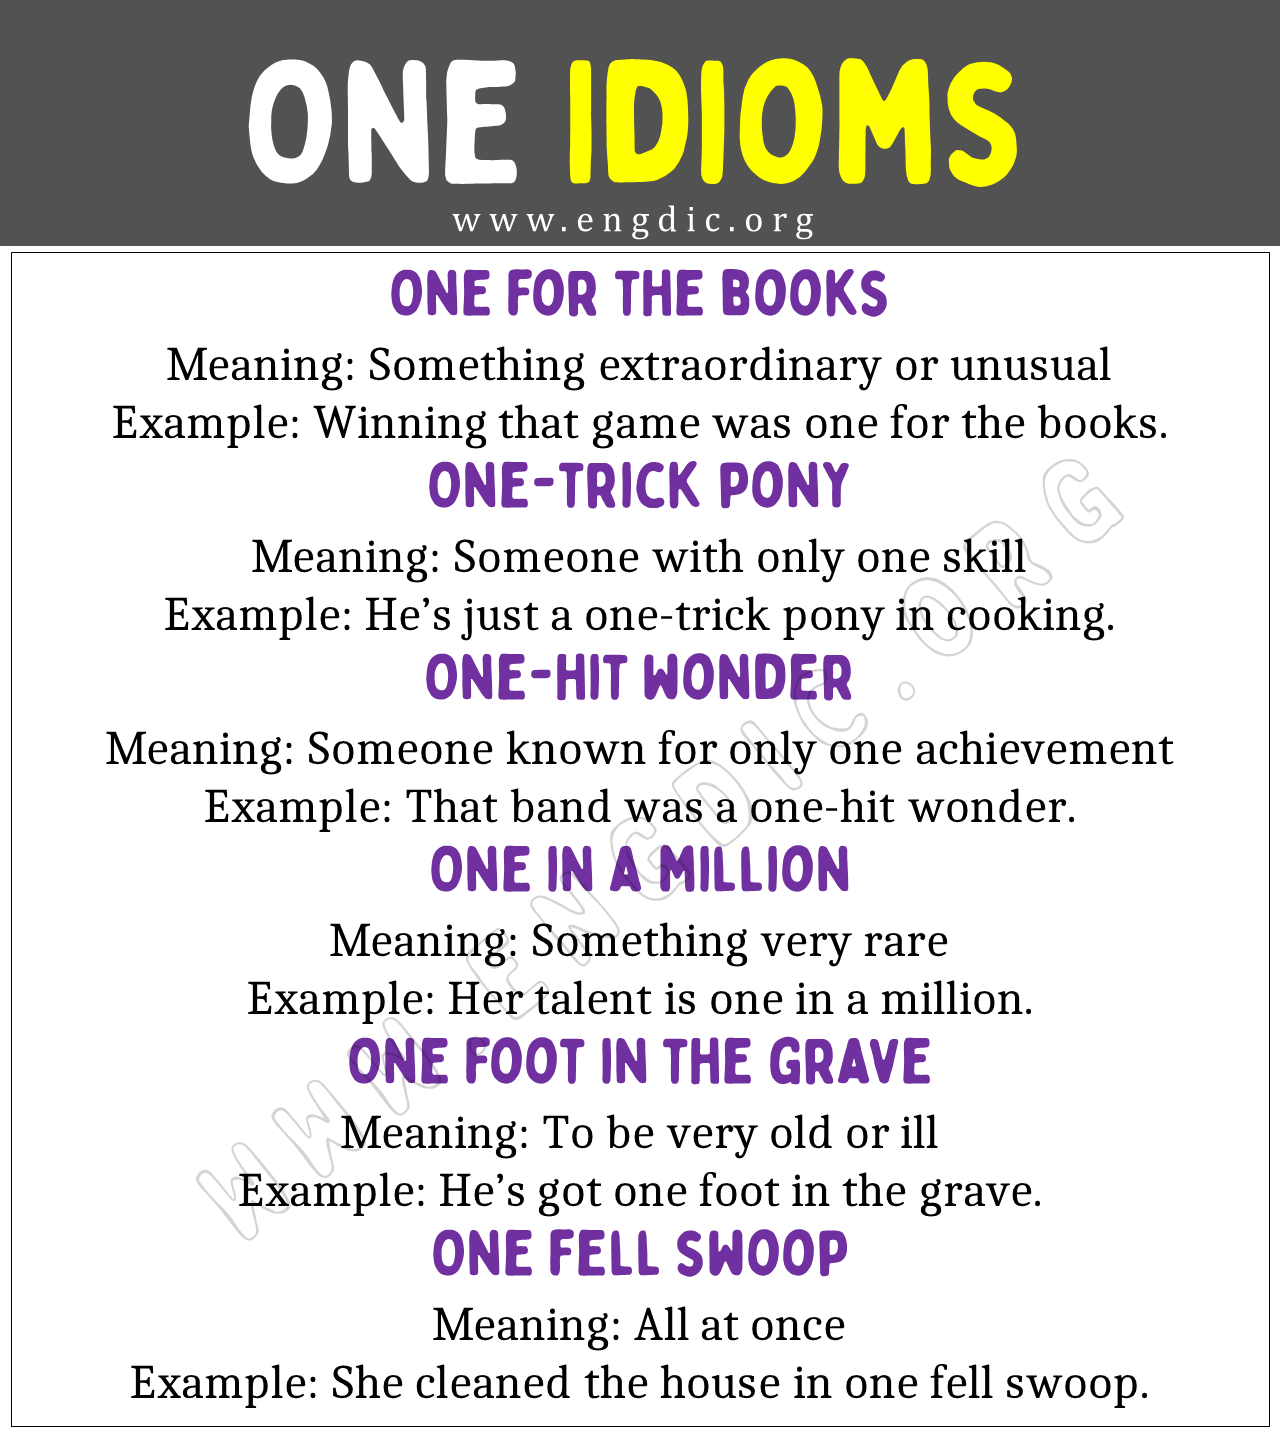 One Idioms